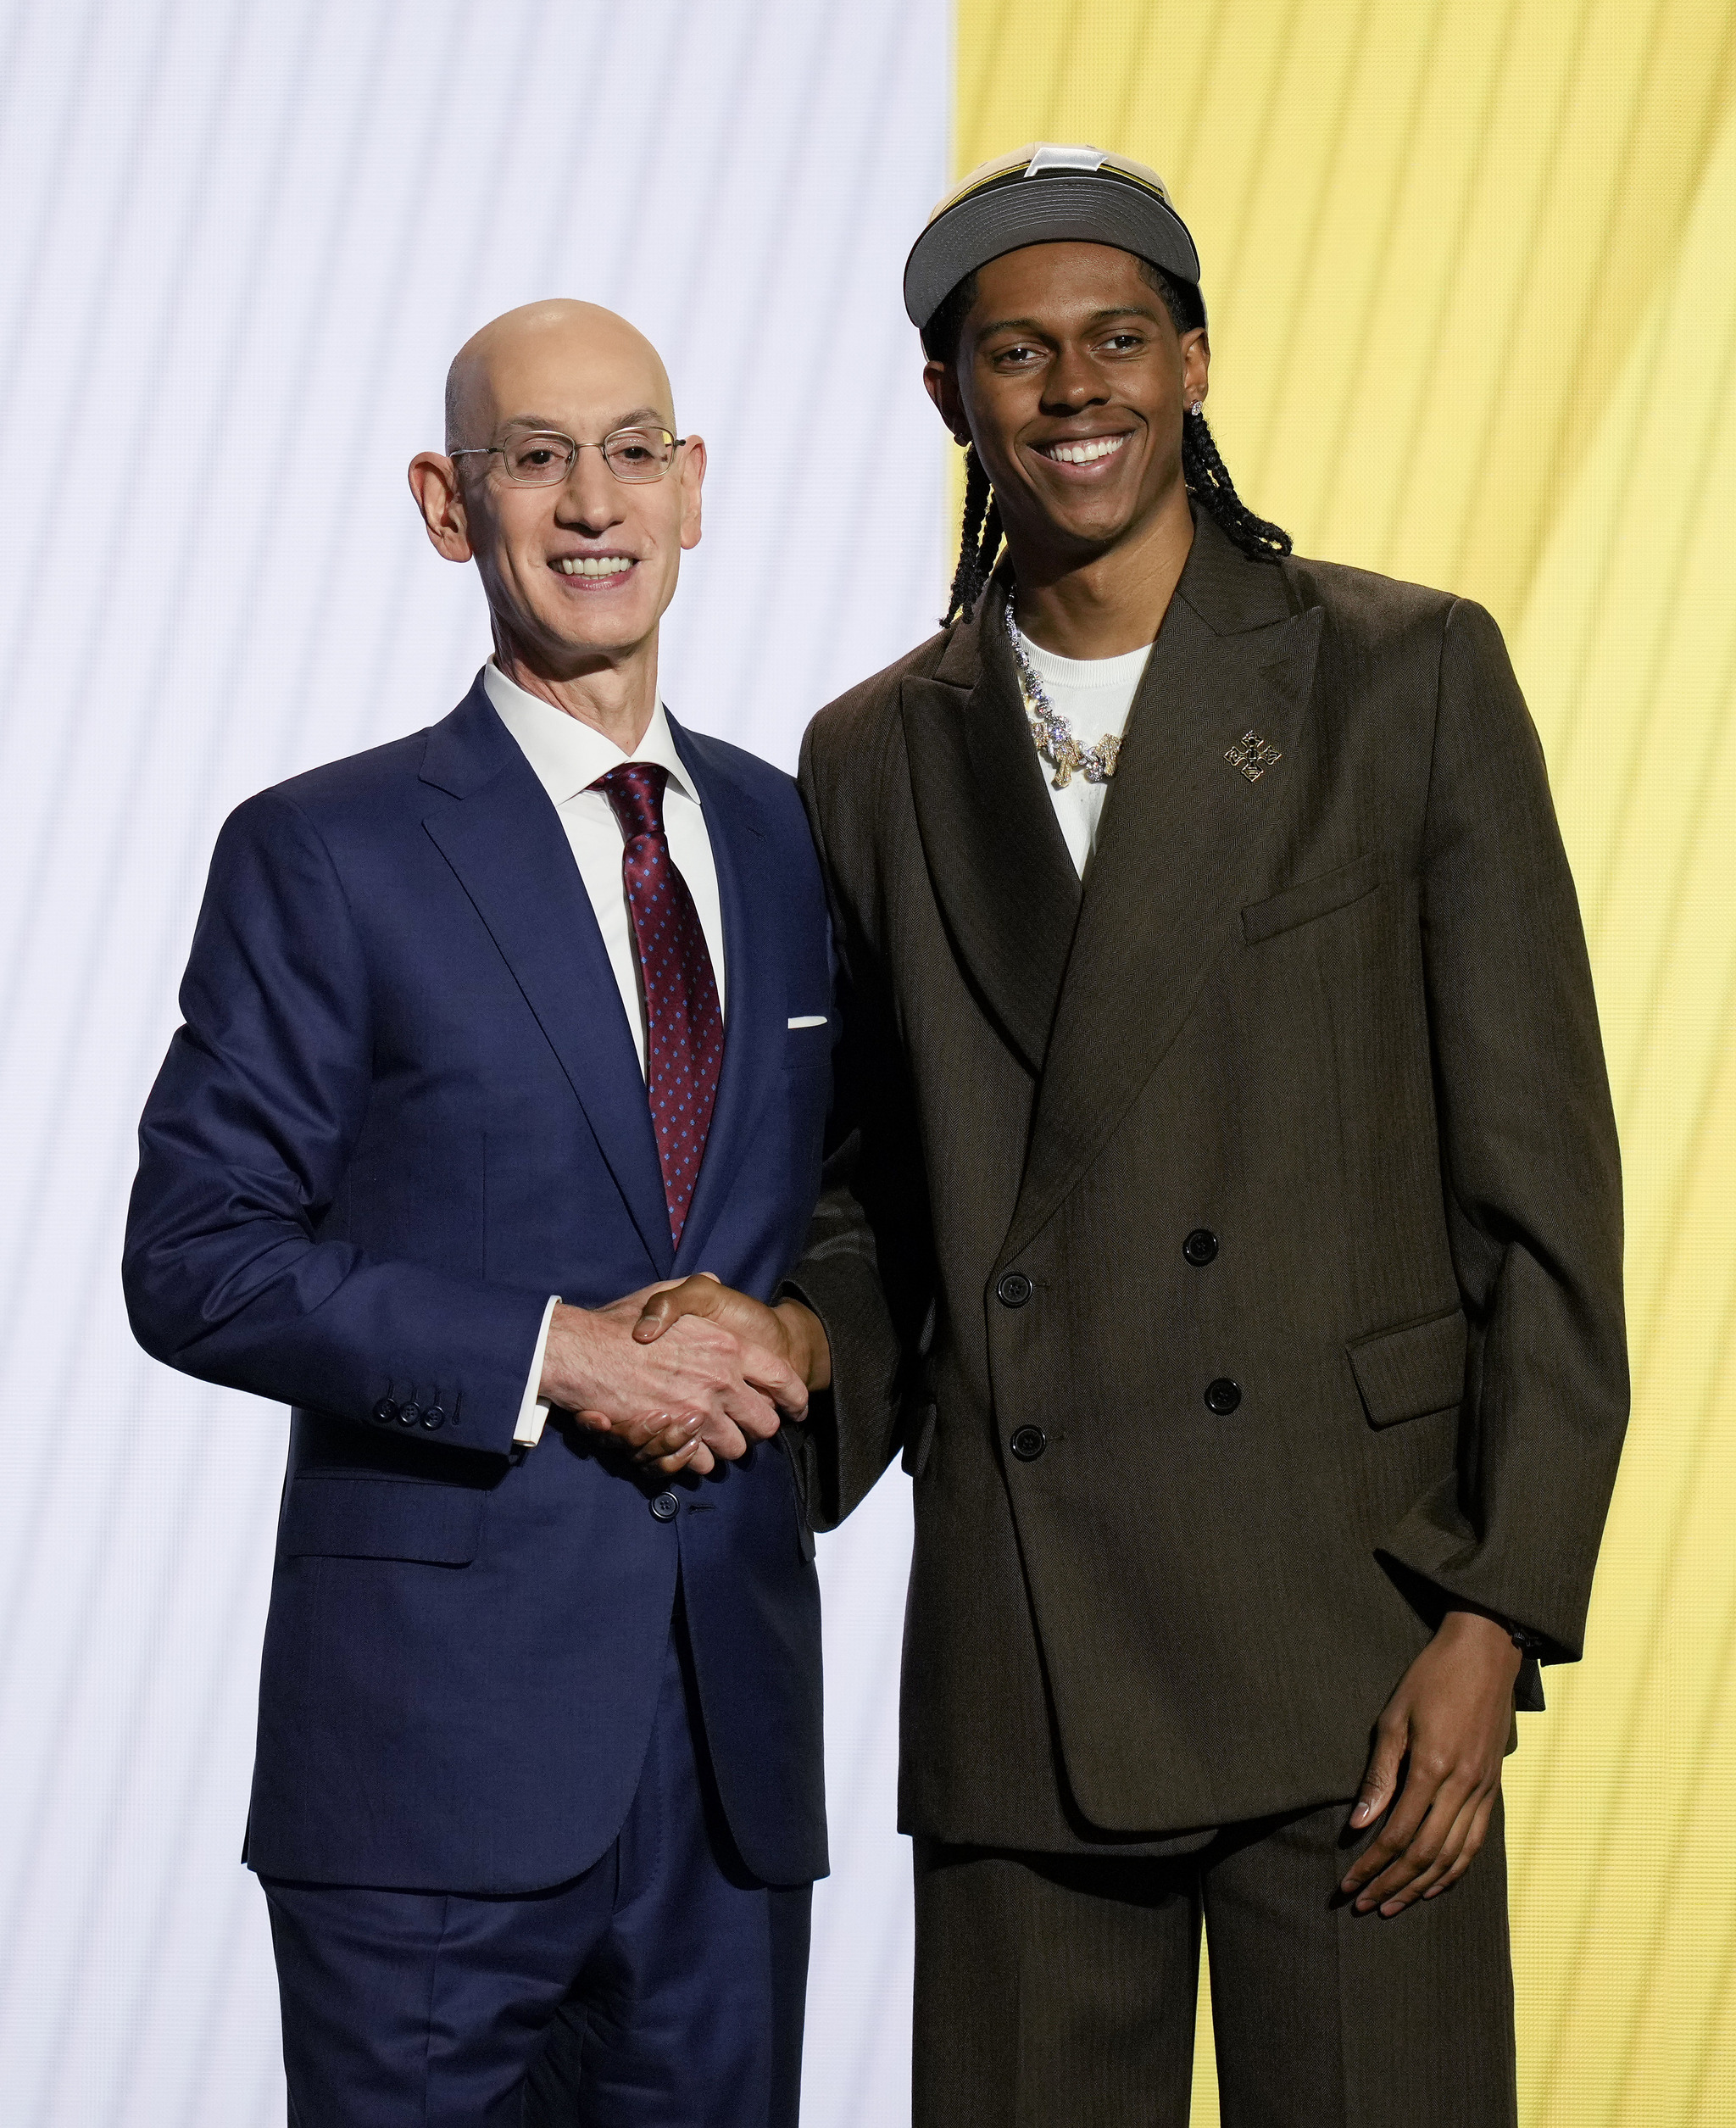 Cody Williams, right, poses for a photo with NBA commissioner Adam Silver after being selected by the Utah Jazz as the 10th pick